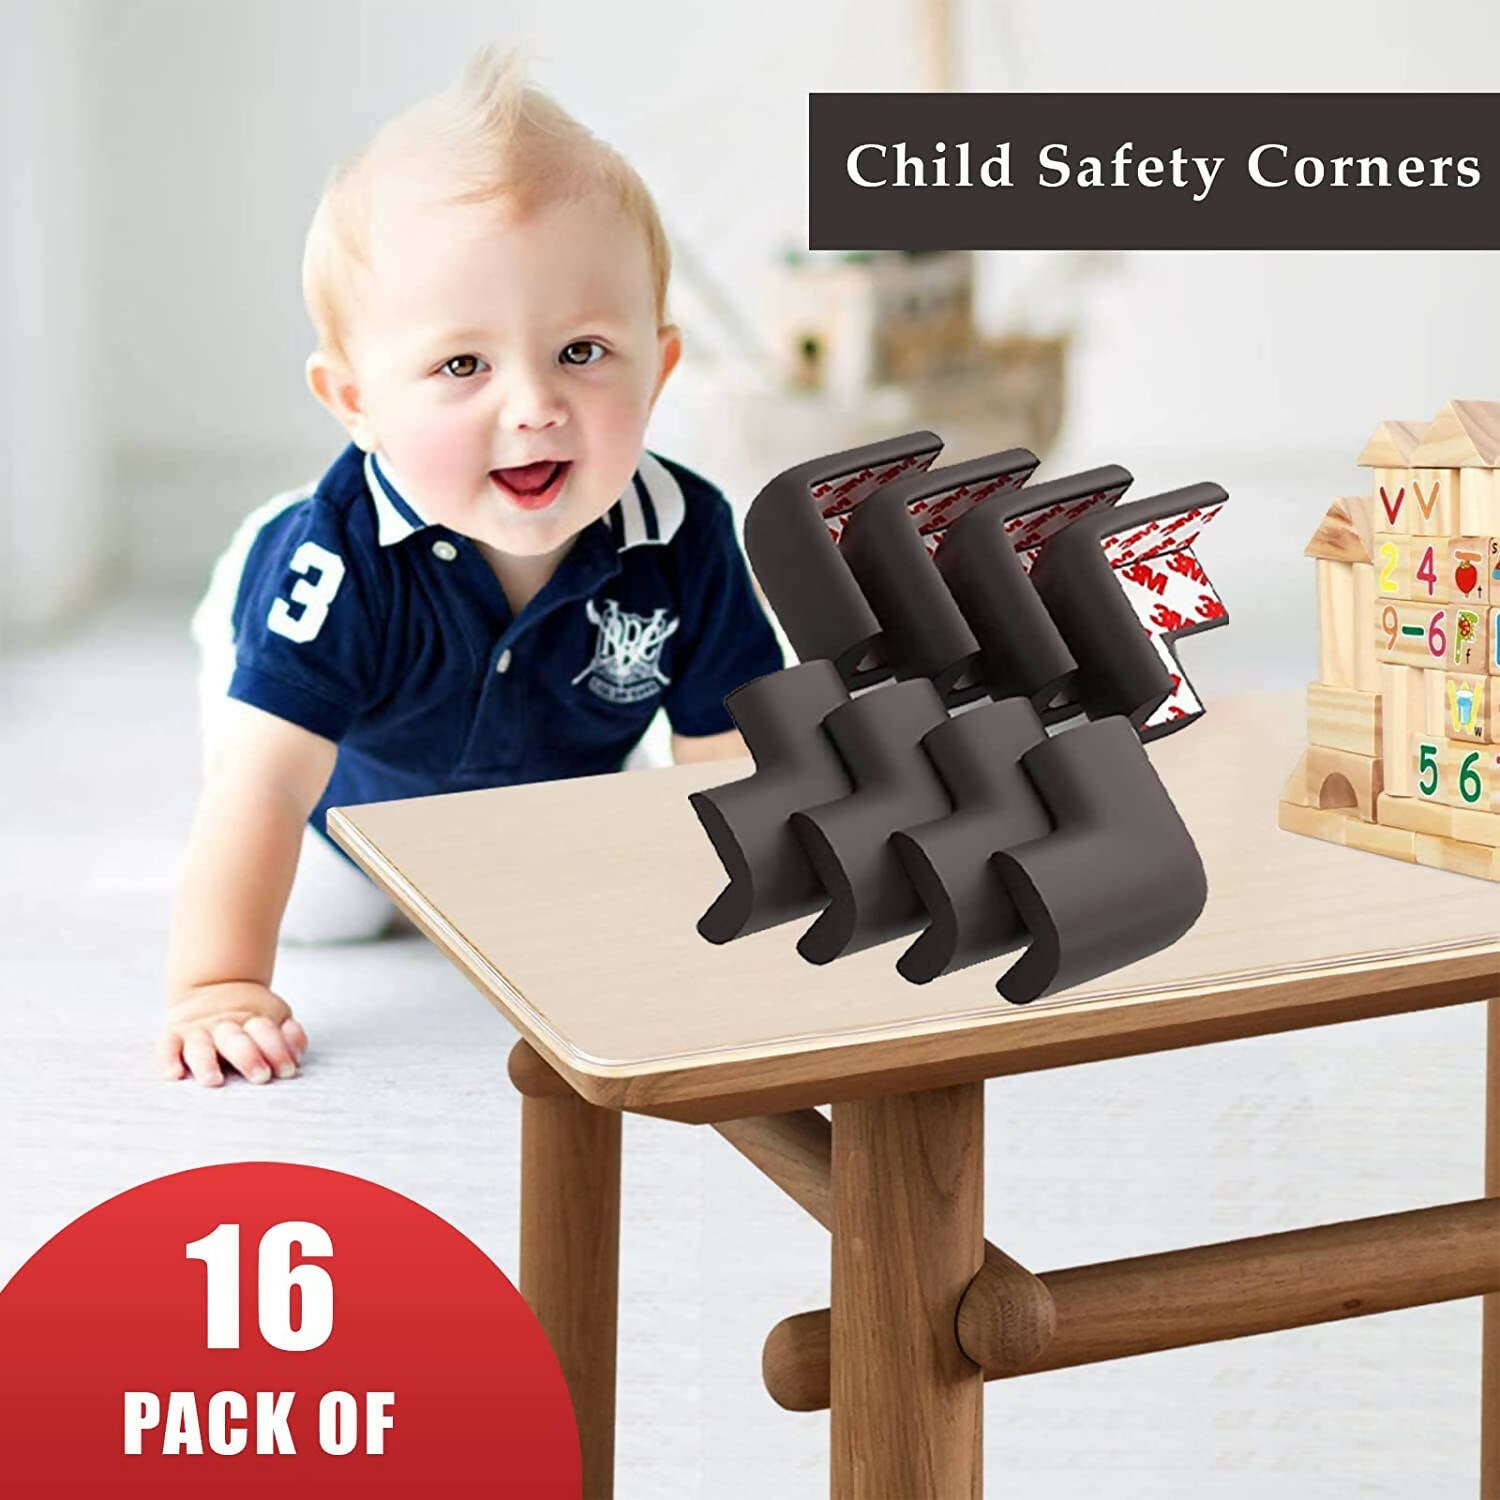 Baby Products Online - Baby Safety Corner Protector Kids